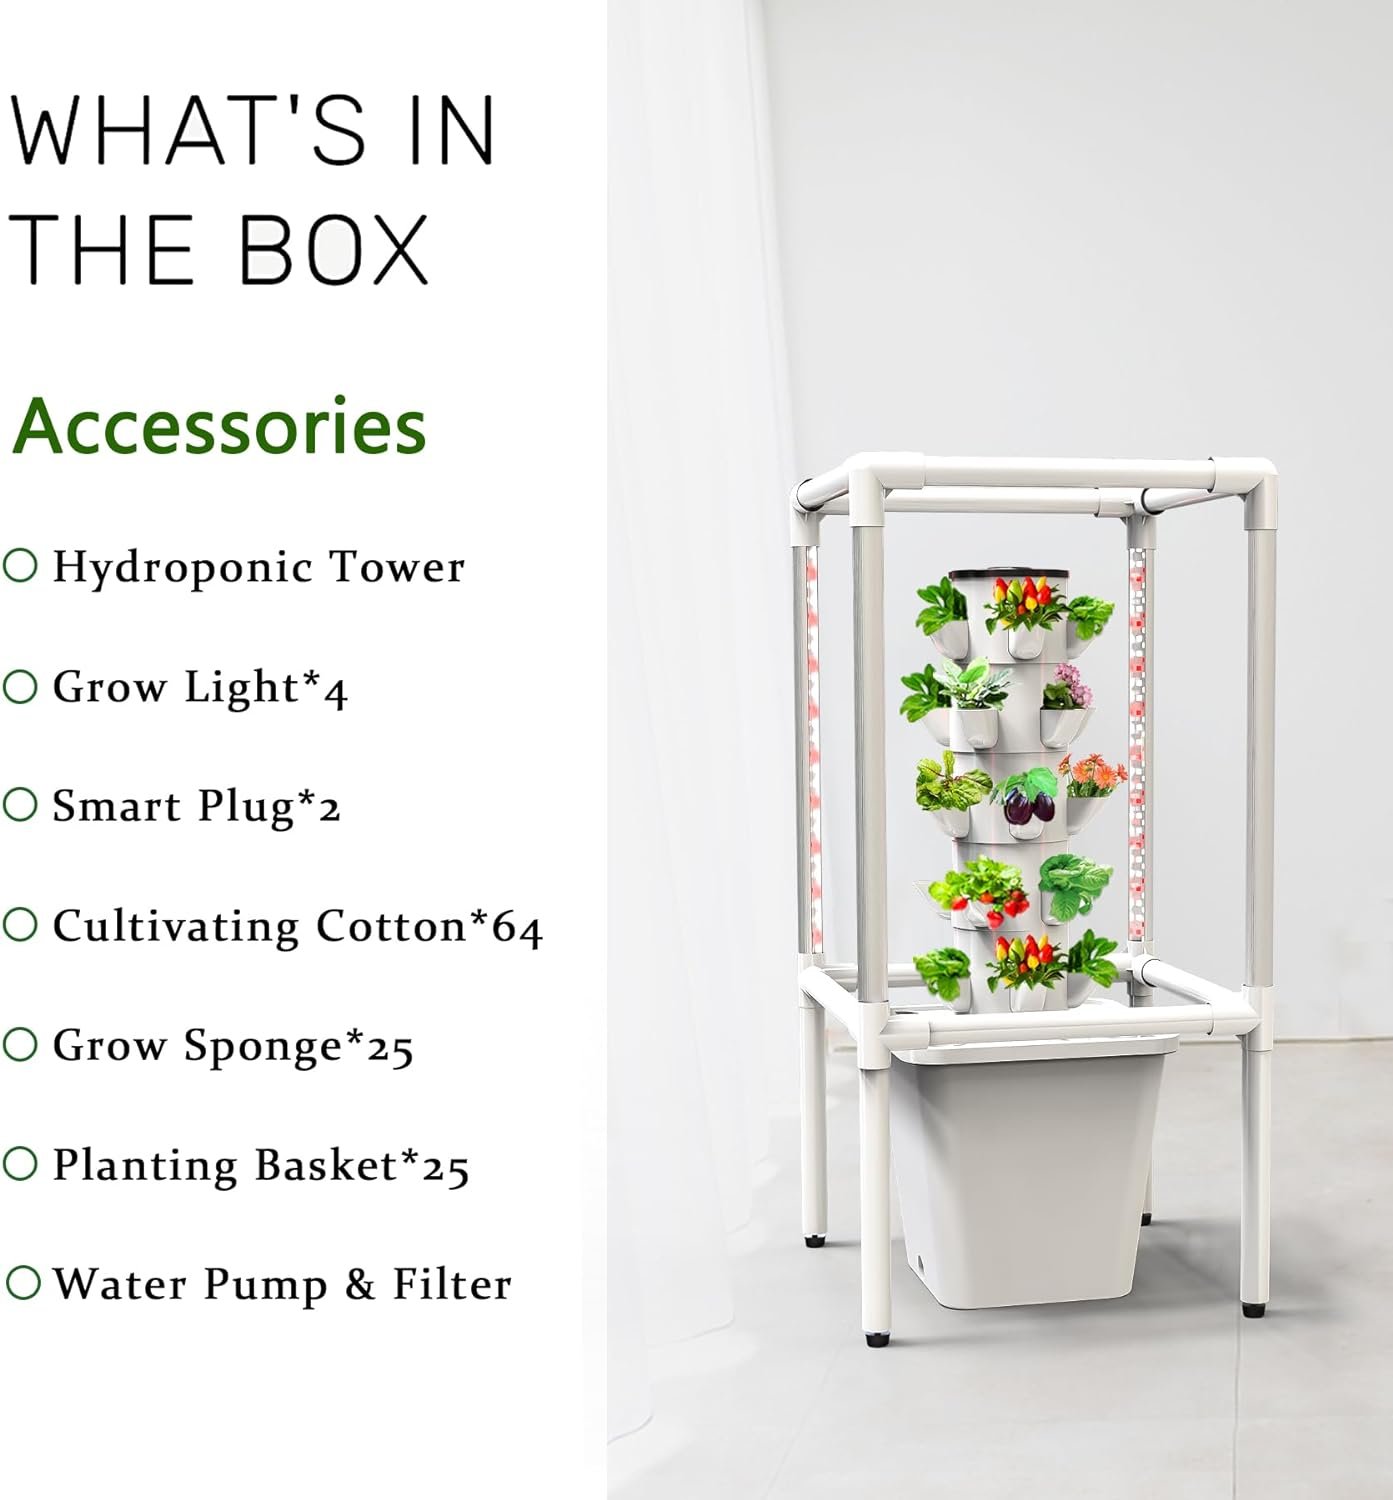 Sjzx Hydroponic Growing System with Grow Lights (No Seedlings Included) |25-Plant Hydroponic System | Home Gardening System for Indoor Herbs, Fruits and Vegetables | BPA-Free Food Grade